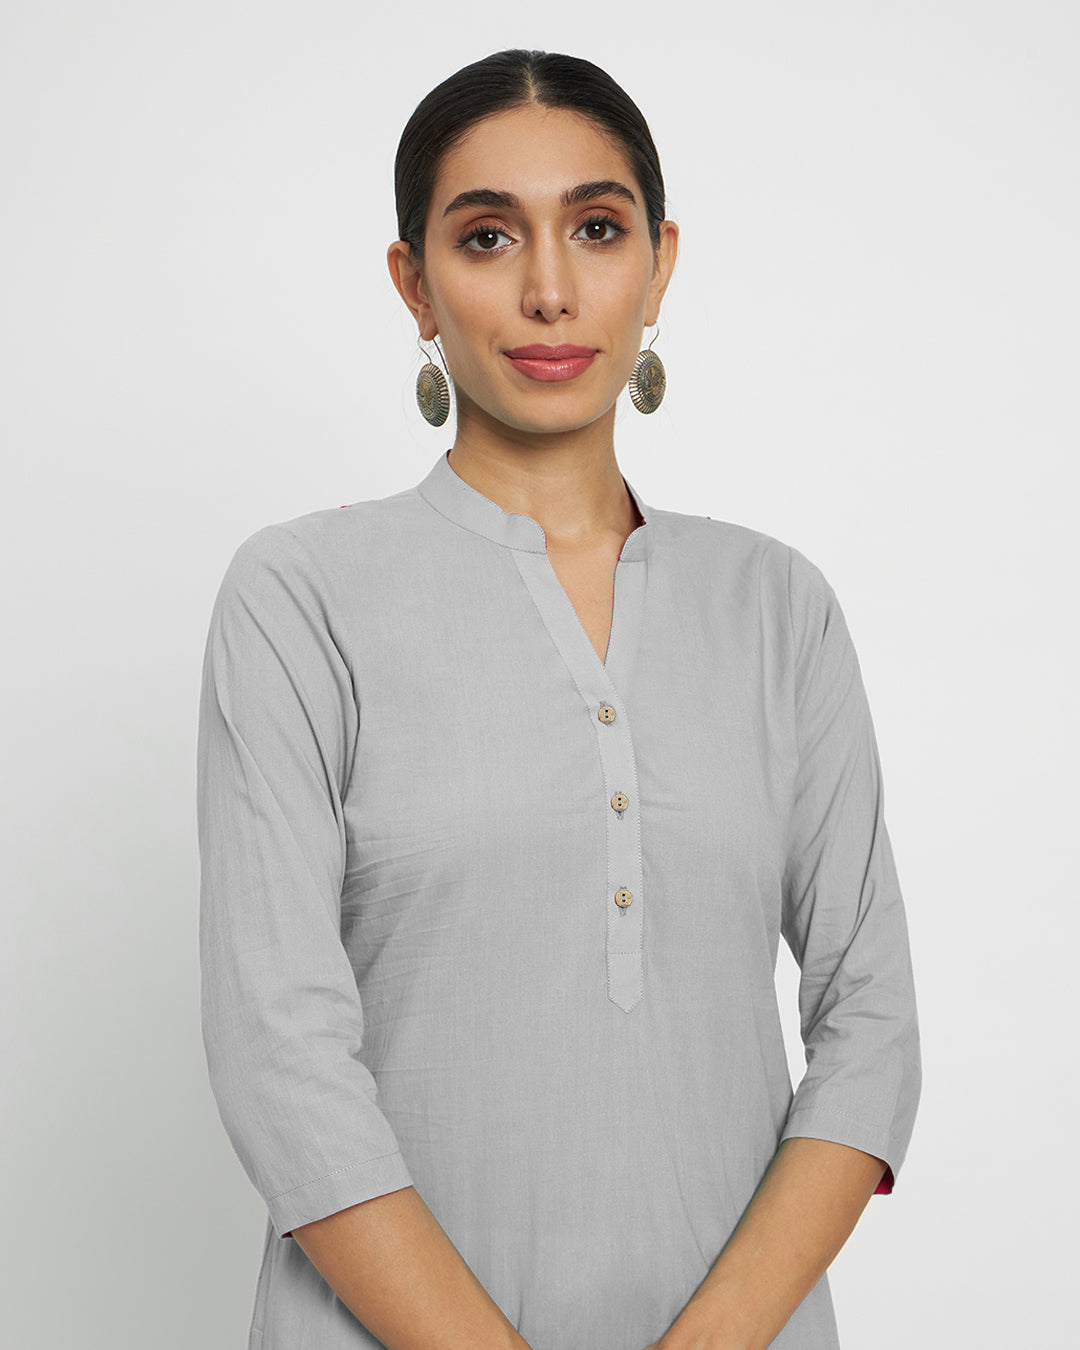 Iced Grey Flattering High-Low Kurta (Without Bottoms)